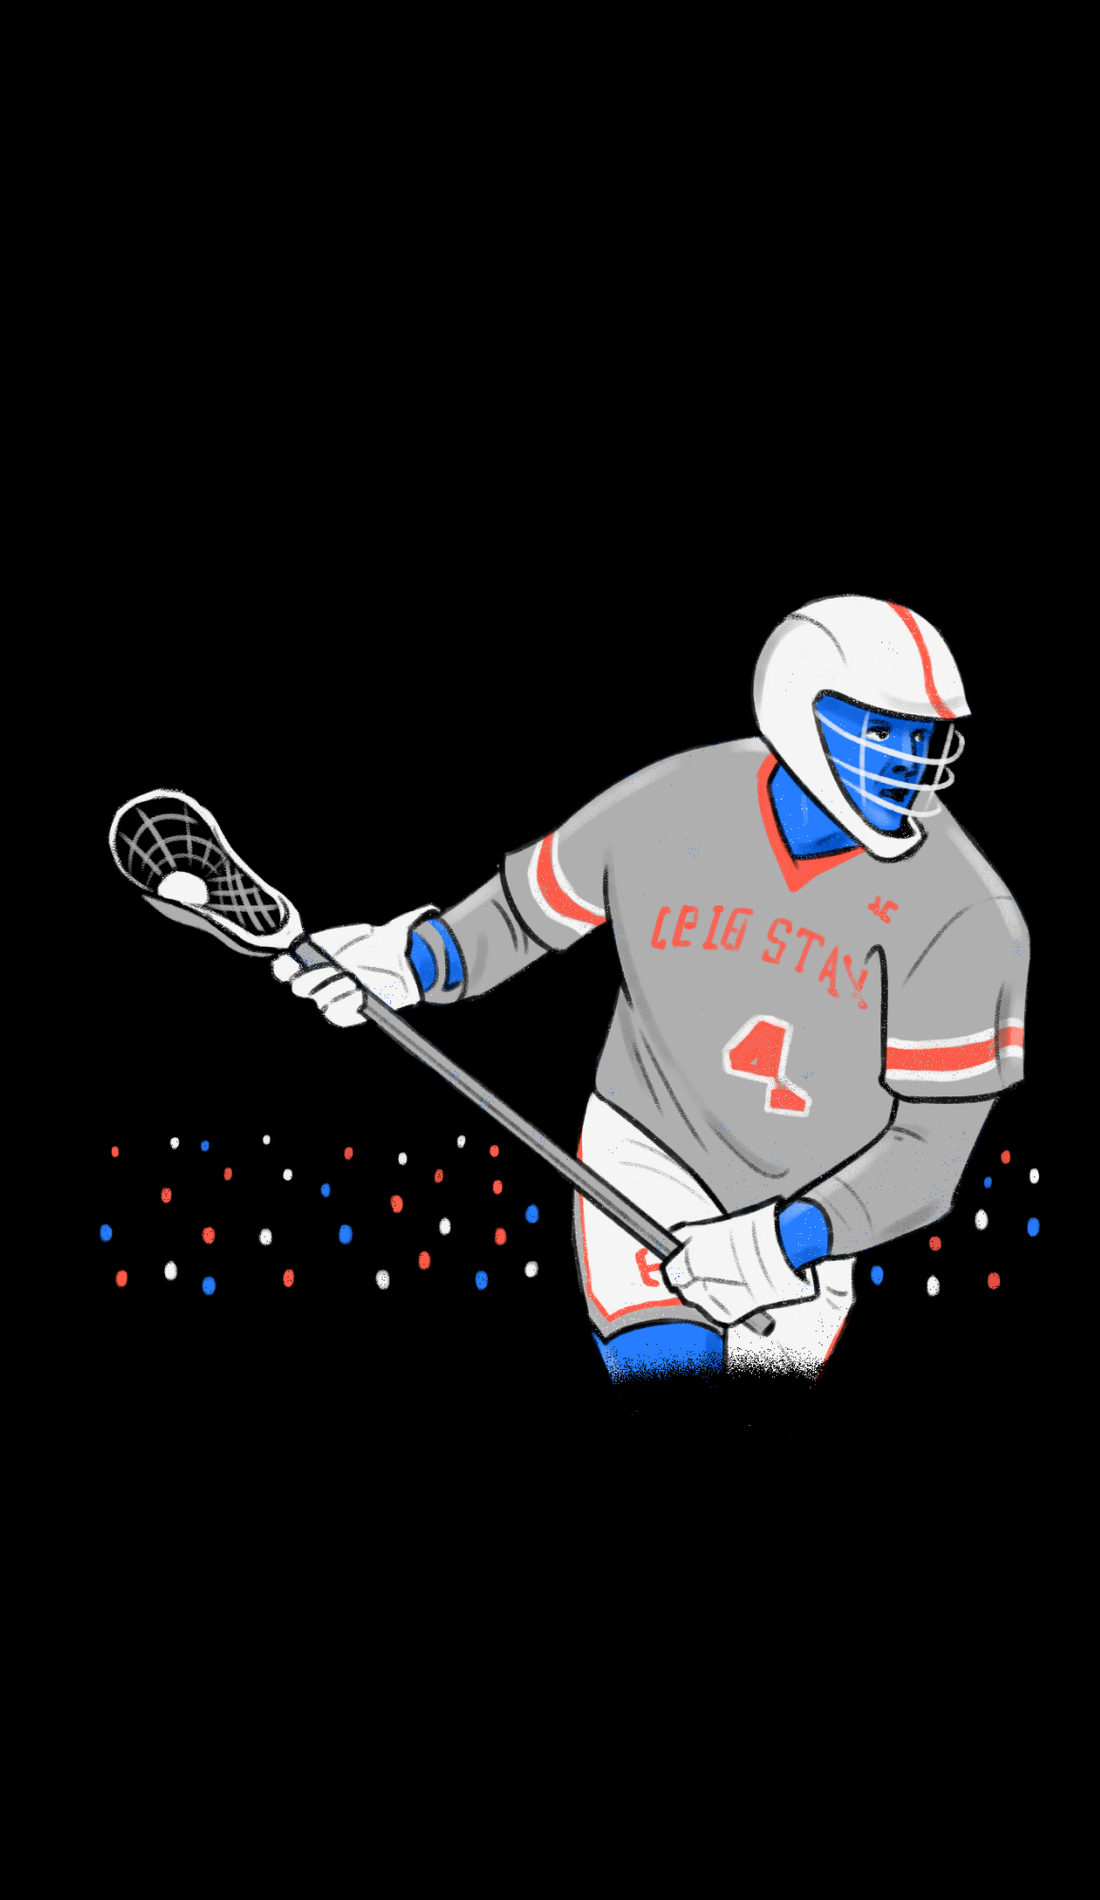 A Panther City Lacrosse Club live event